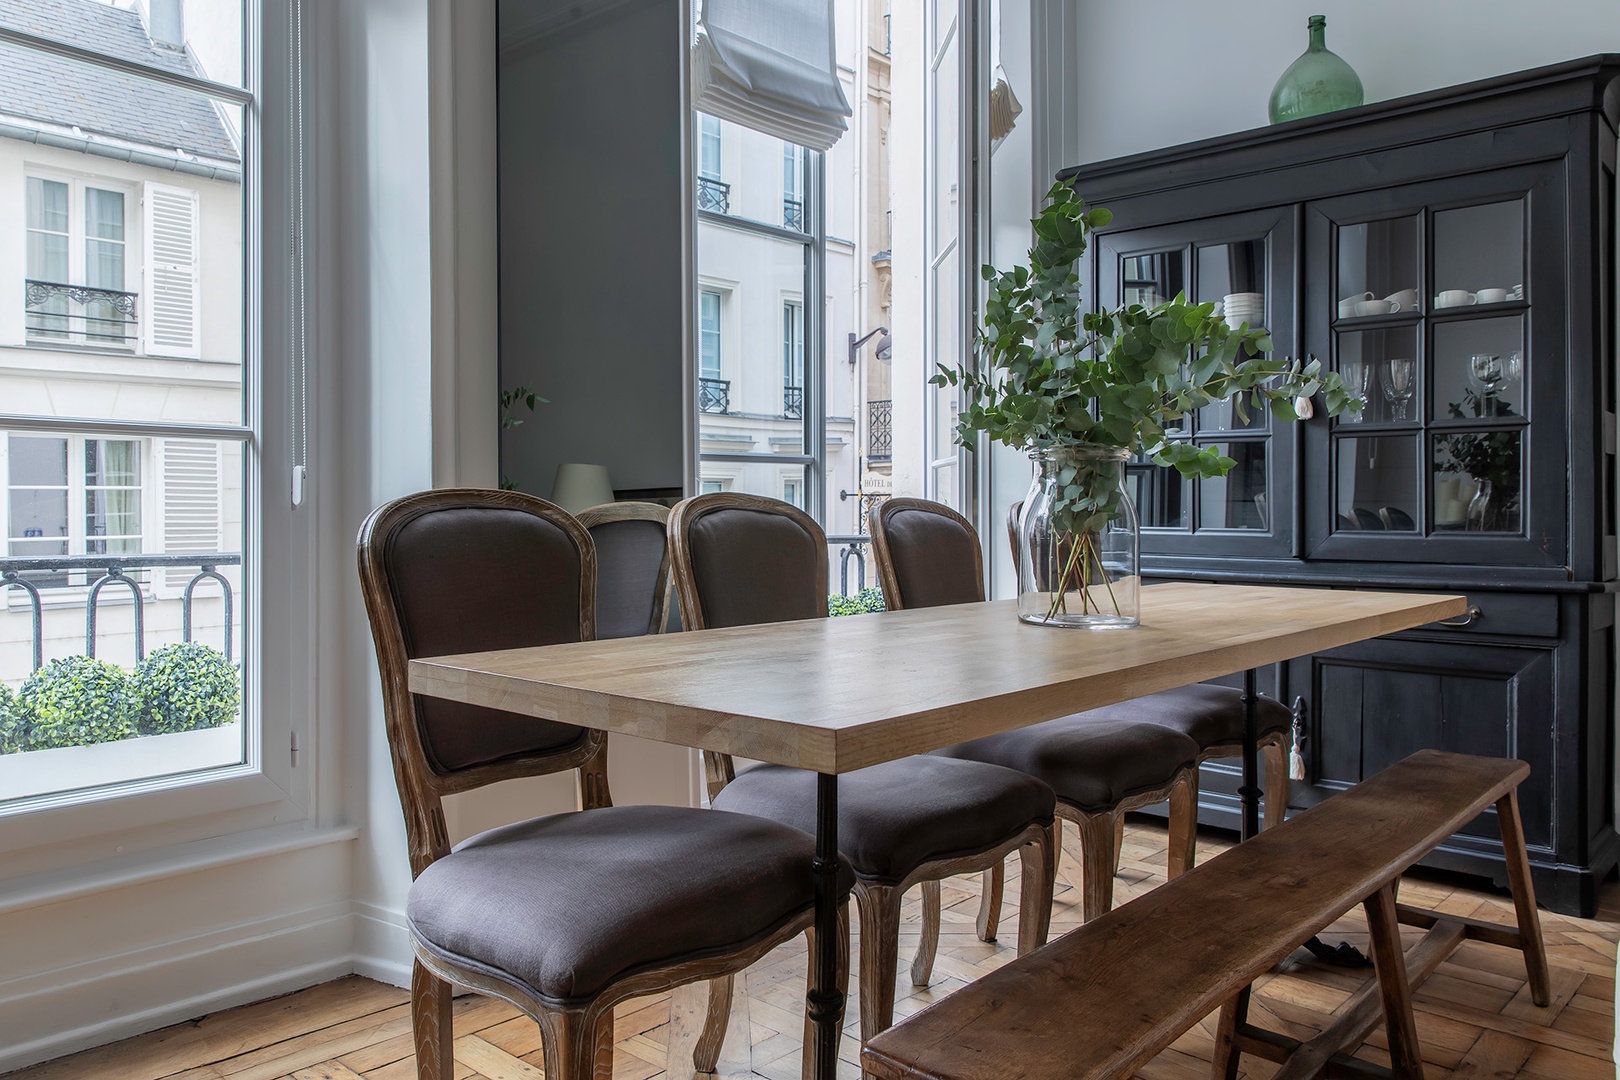 Dine with a charming Parisian view in the open-plan living room.